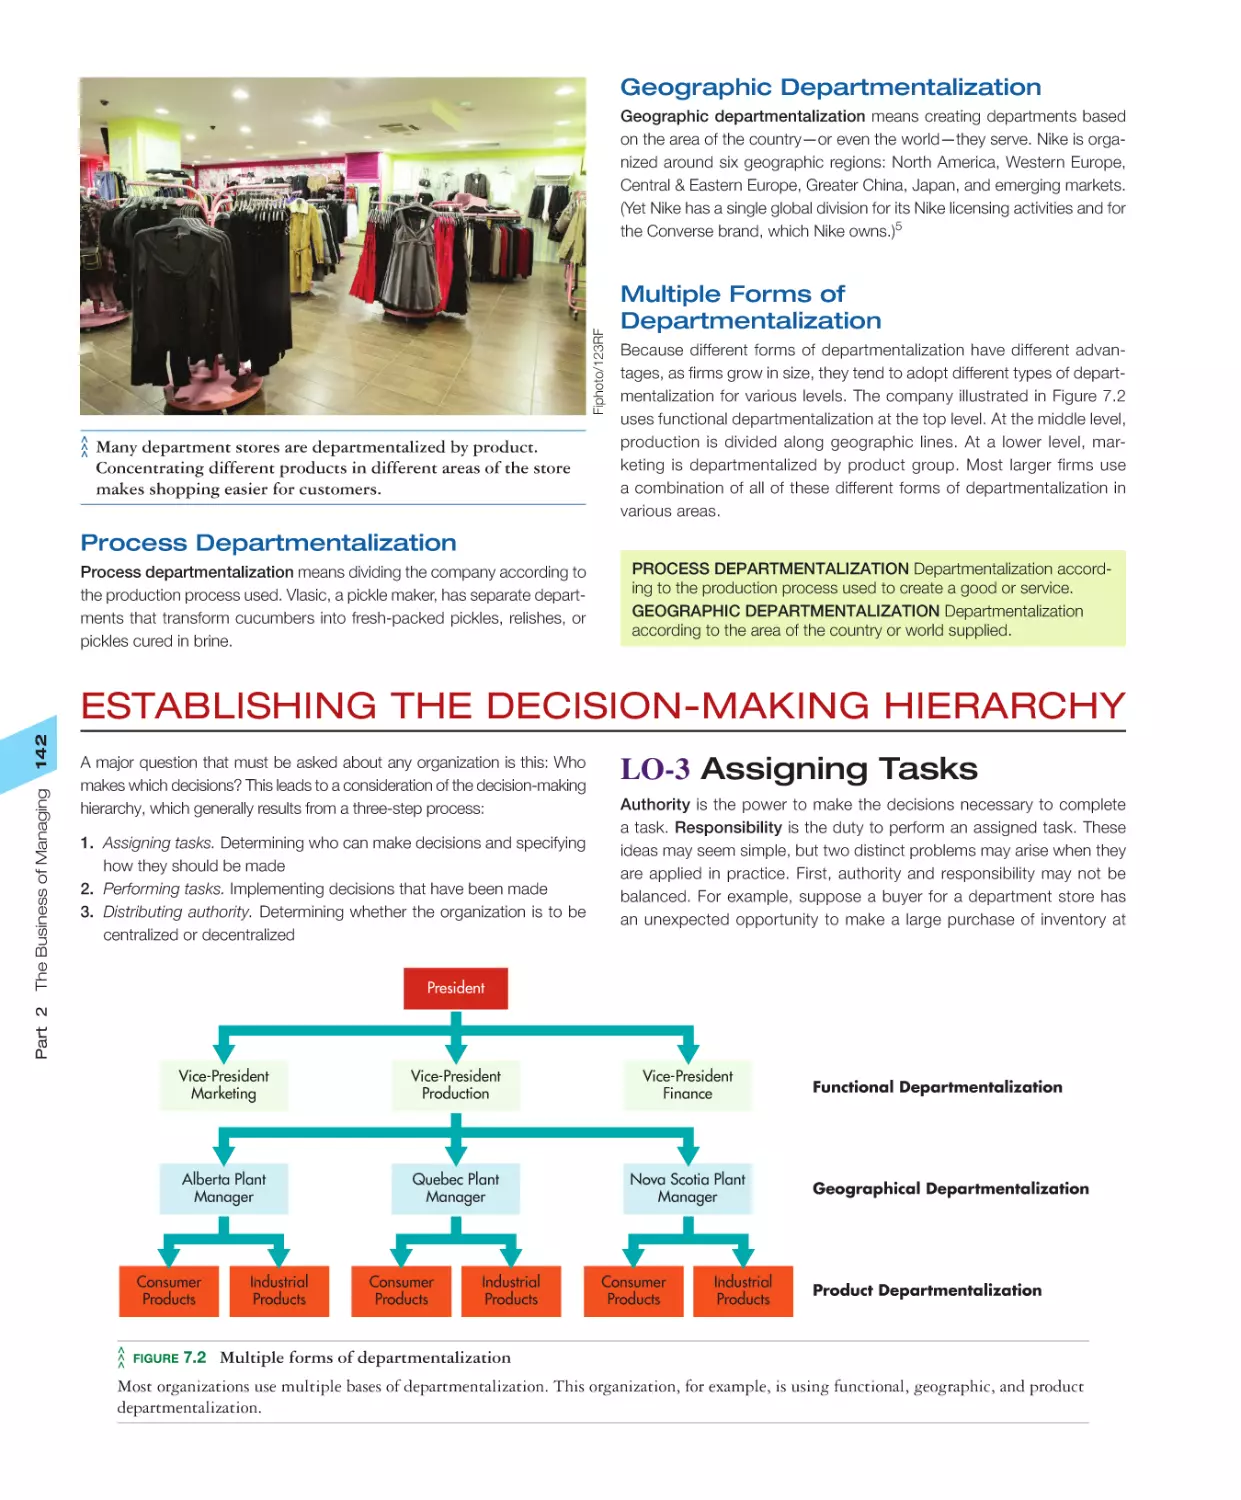 Establishing the Decision‐Making Hierarchy
LO‐3 Assigning Tasks